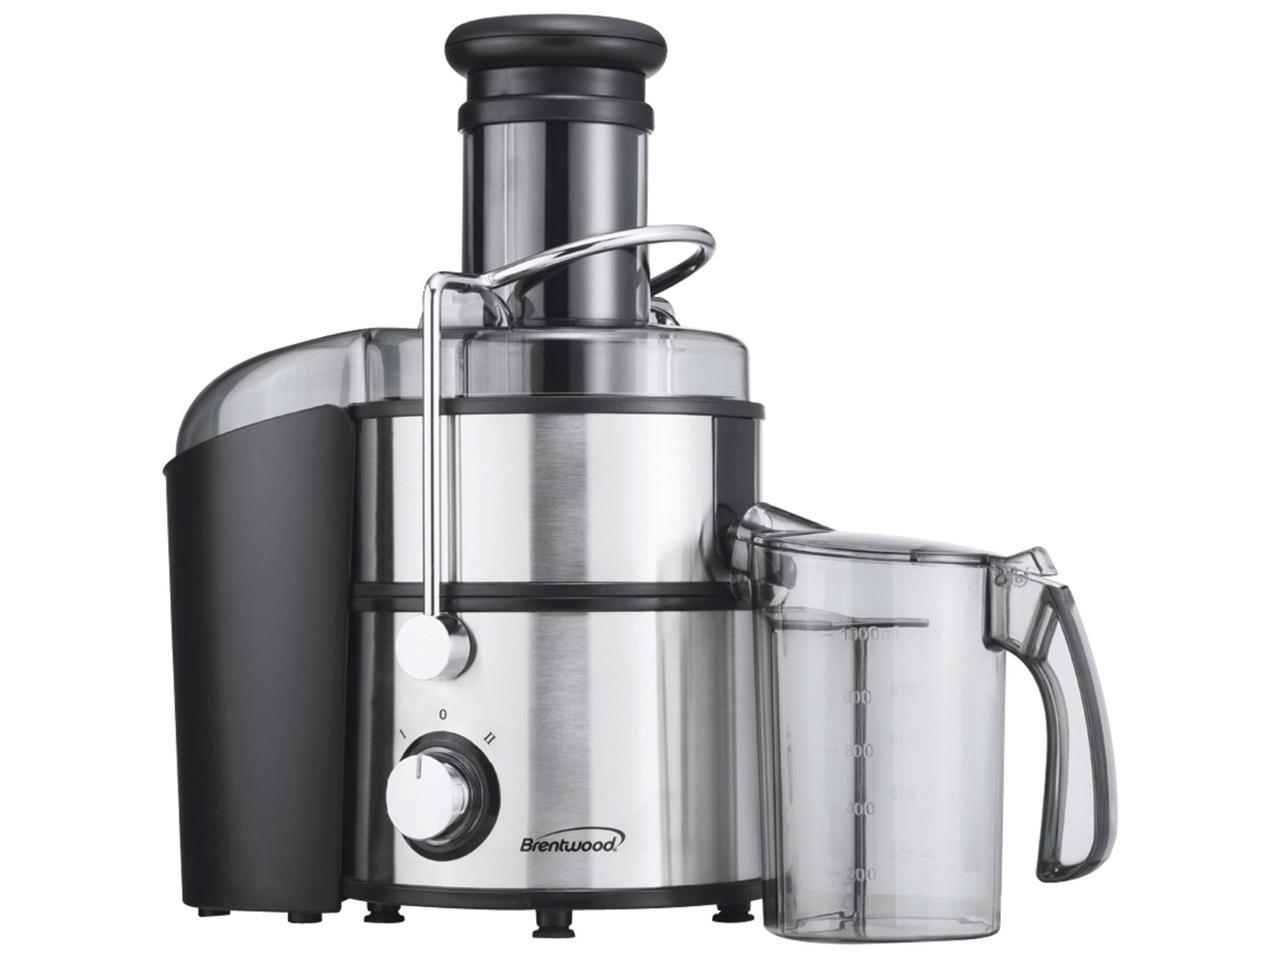 Brentwood Appliances JC-500 2-Speed 800Watt Juice Extractor with Graduated Jar, Stainless Steel - image 2 of 5